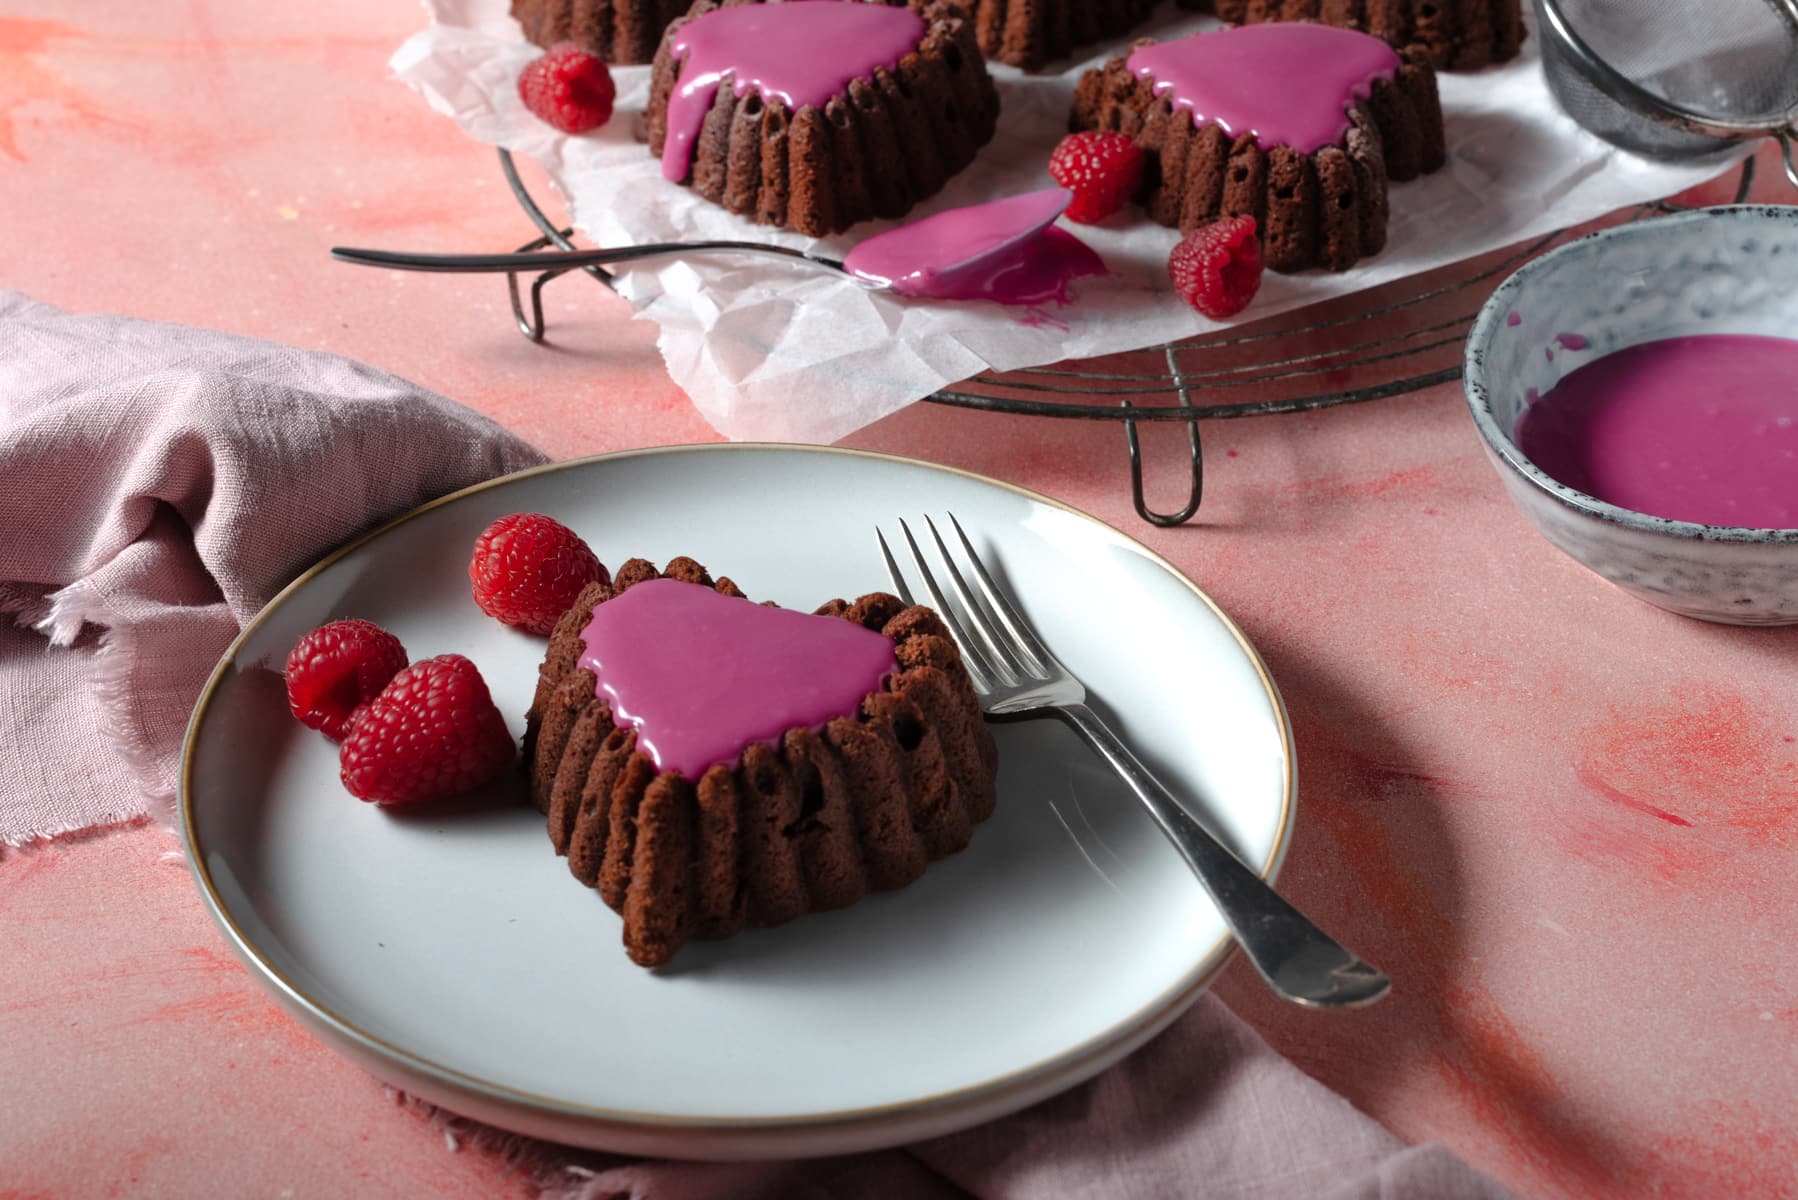 Small chocolate heart shaped cakelettes filled topped with pink icing served with raspberries.